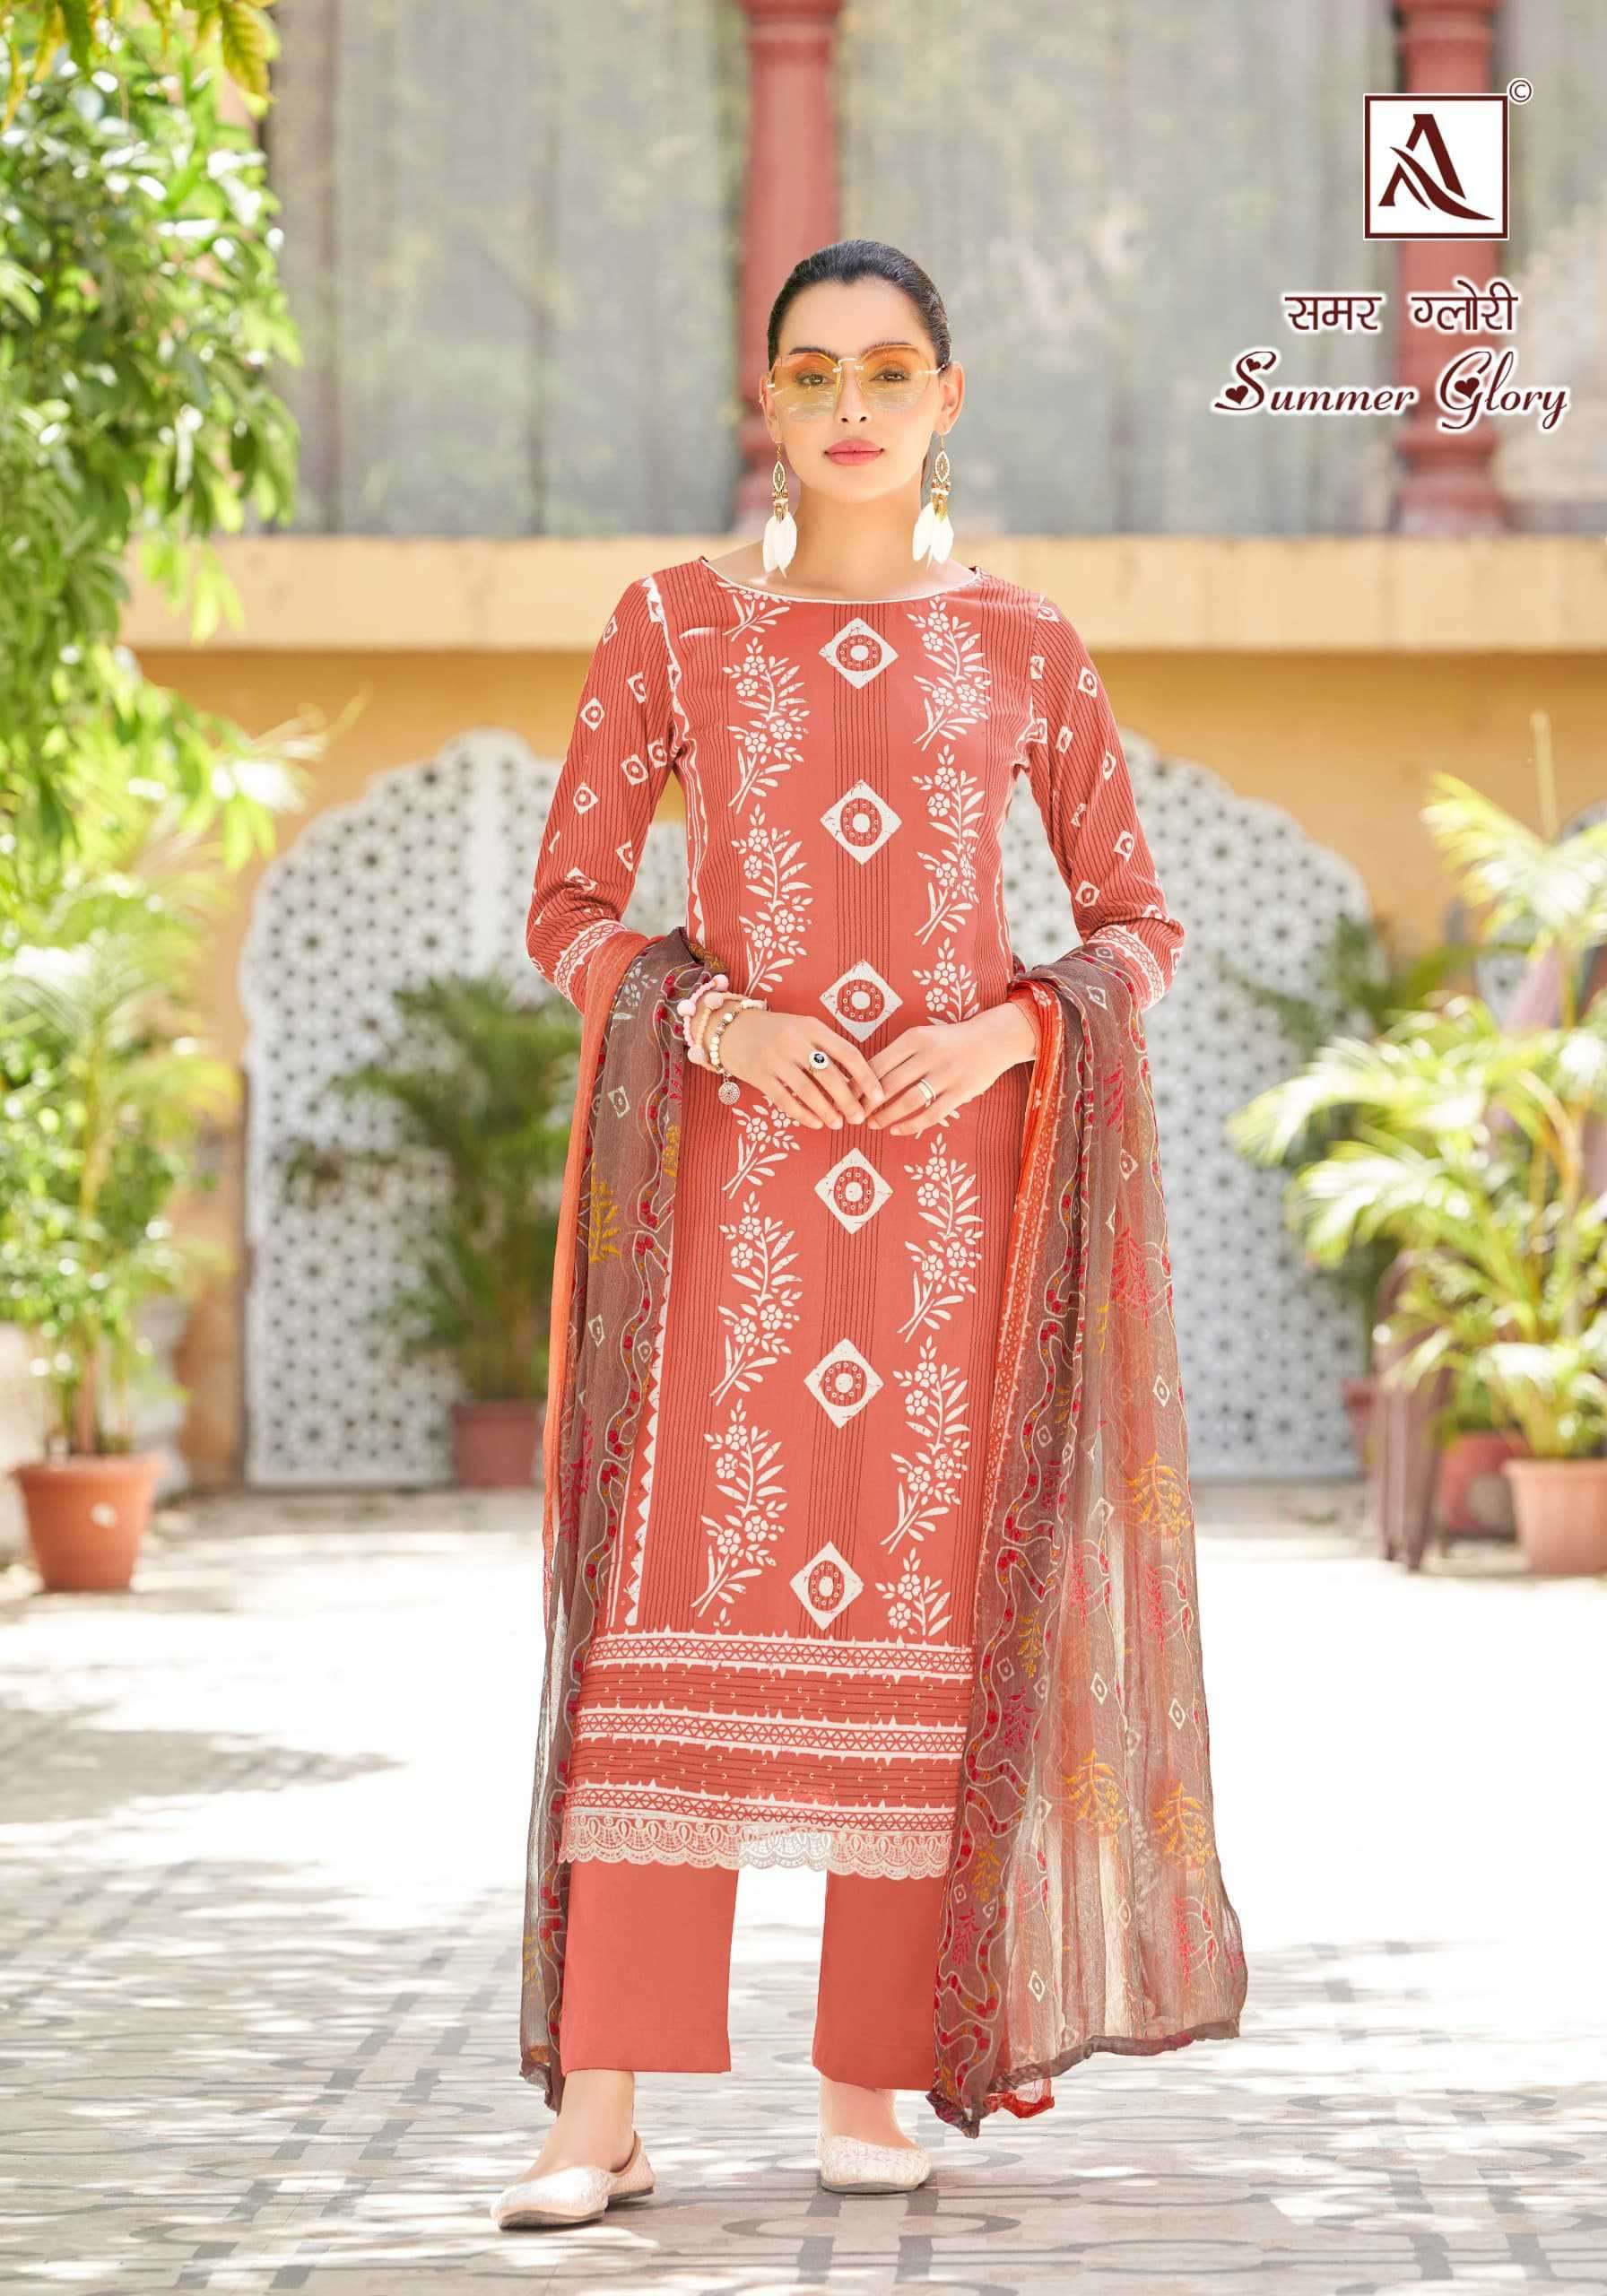 SUMMER GLORY SERIES 1540 BY ALOK SUITS DESIGNER PRINTED AND WORK ZAM COTTON SUITS ARE AVAILABLE AT WHOLESALE PRICE